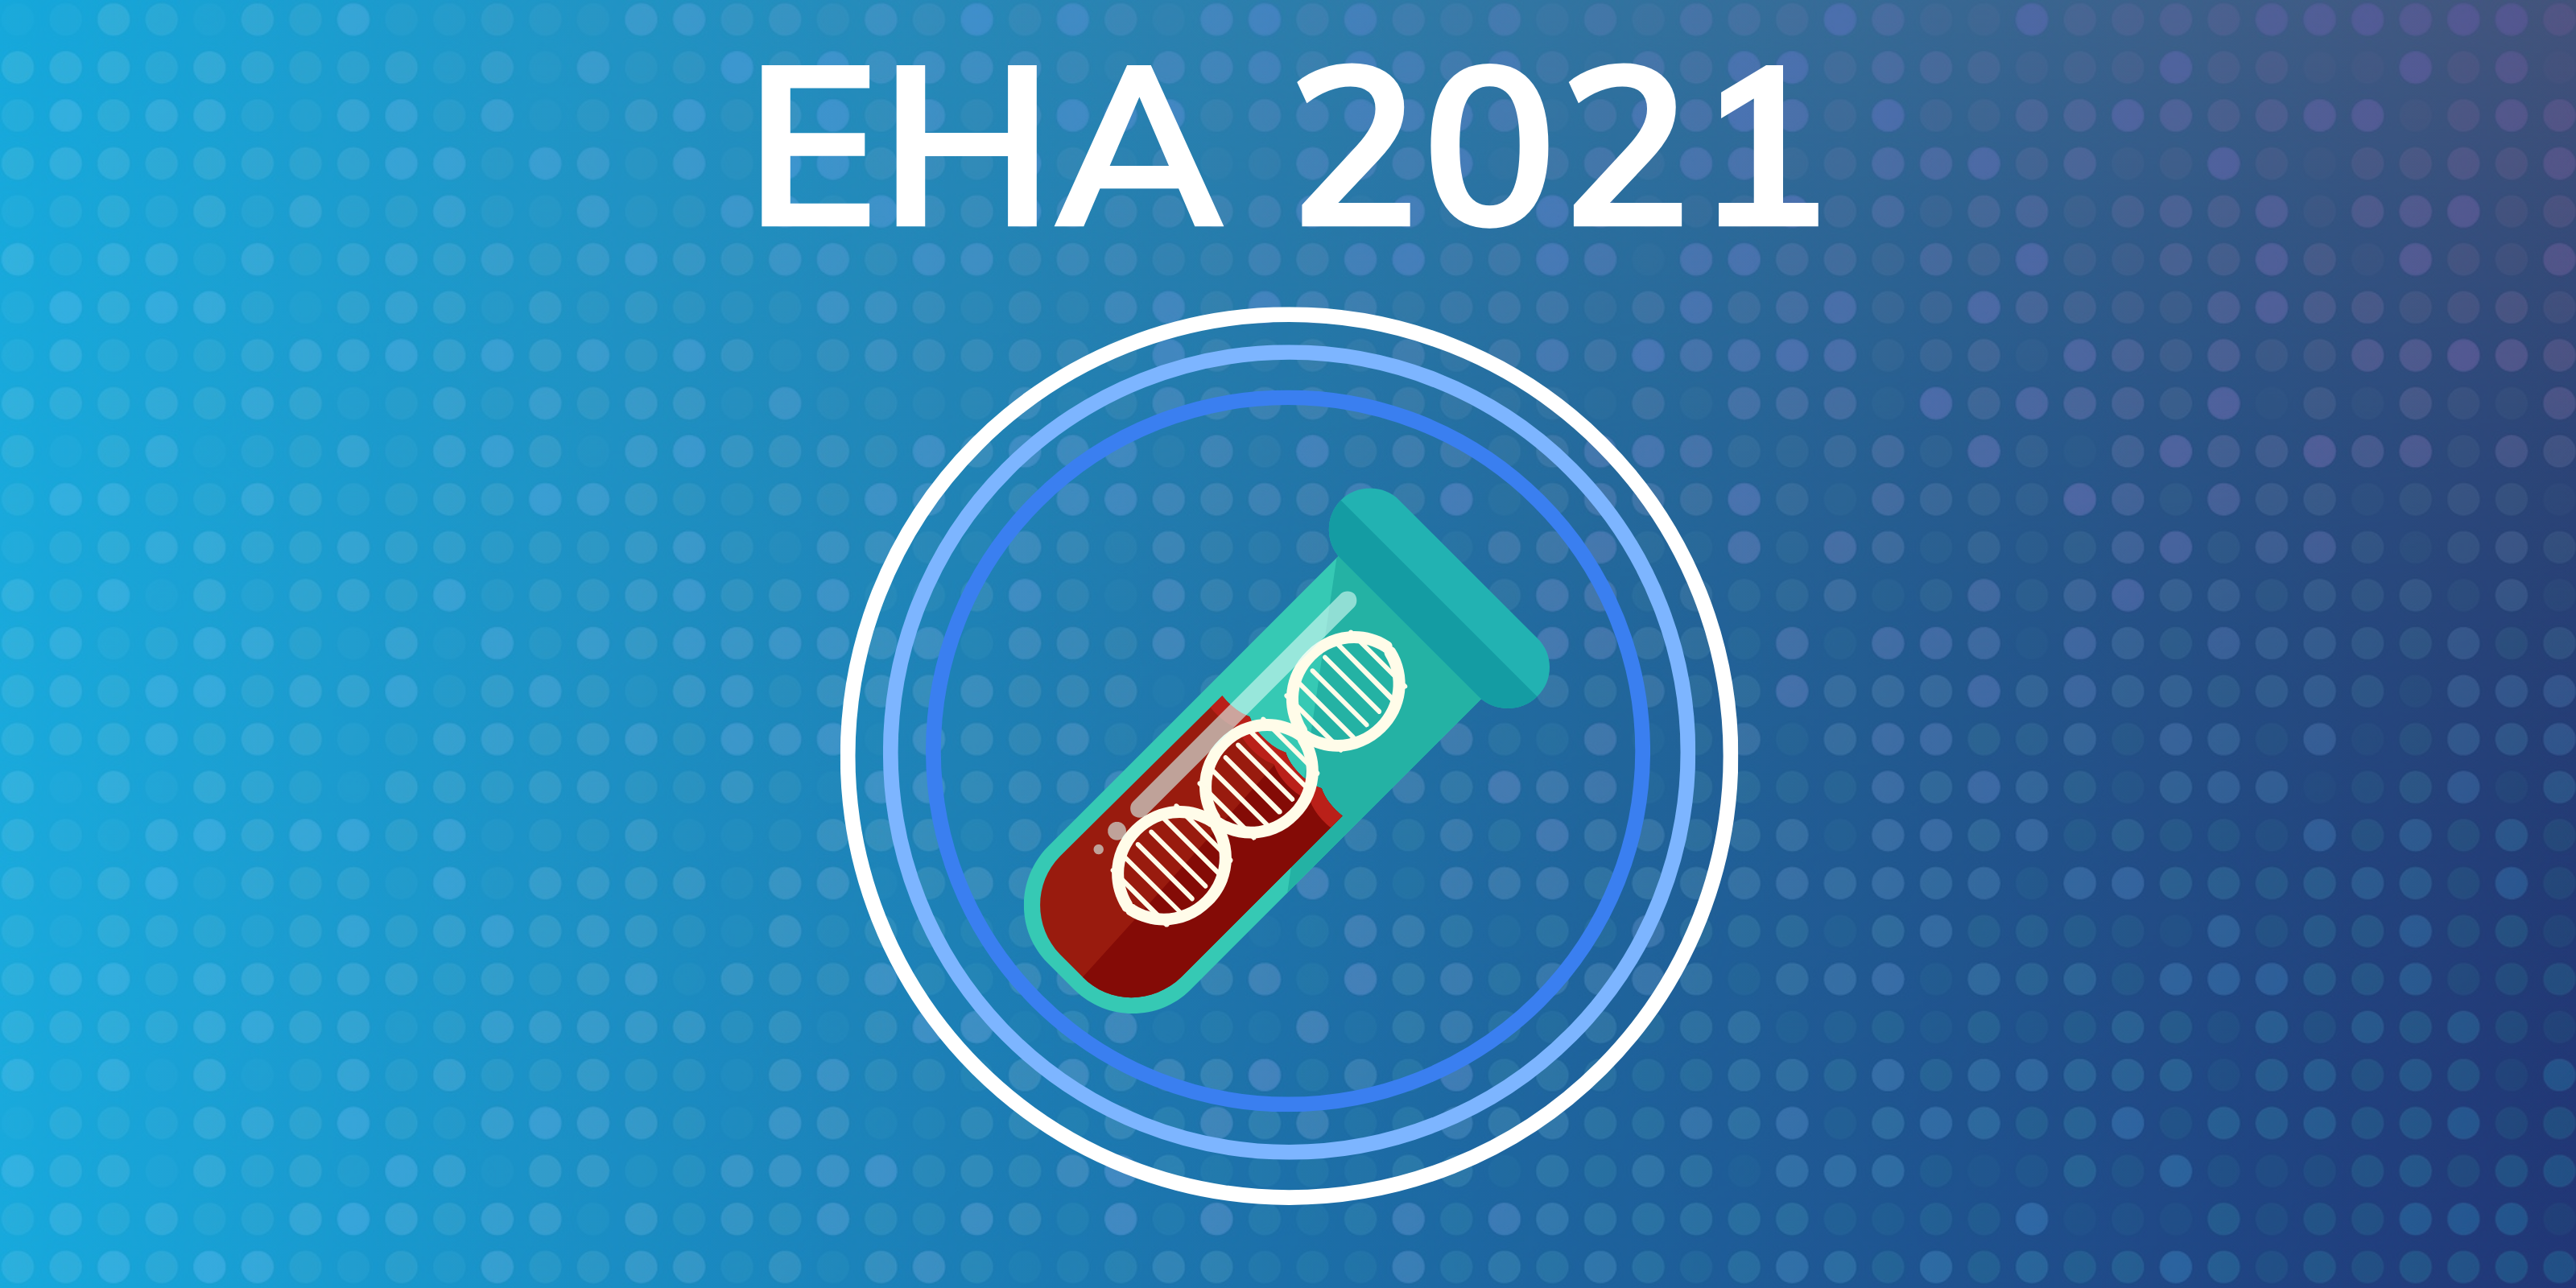 EHA Preview: Advances, Outcomes in CAR T-Cell Therapies and Management Challenges